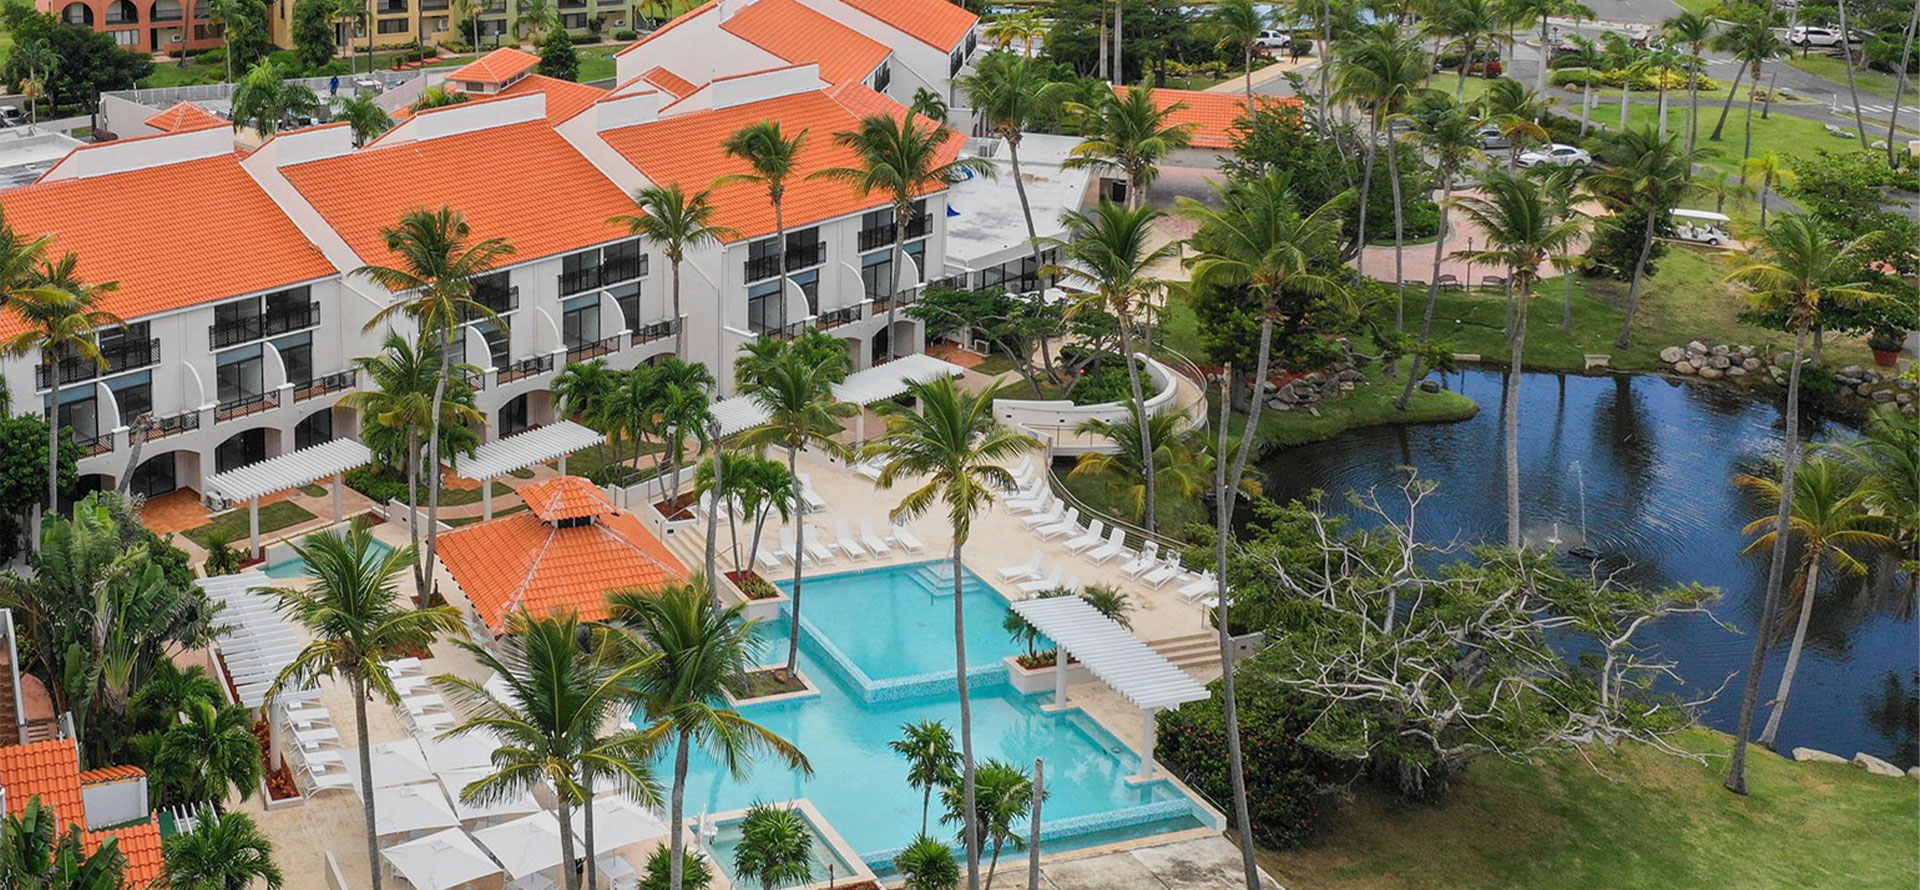 Puerto rico  all-inclusive adults only resort with palmtrees.